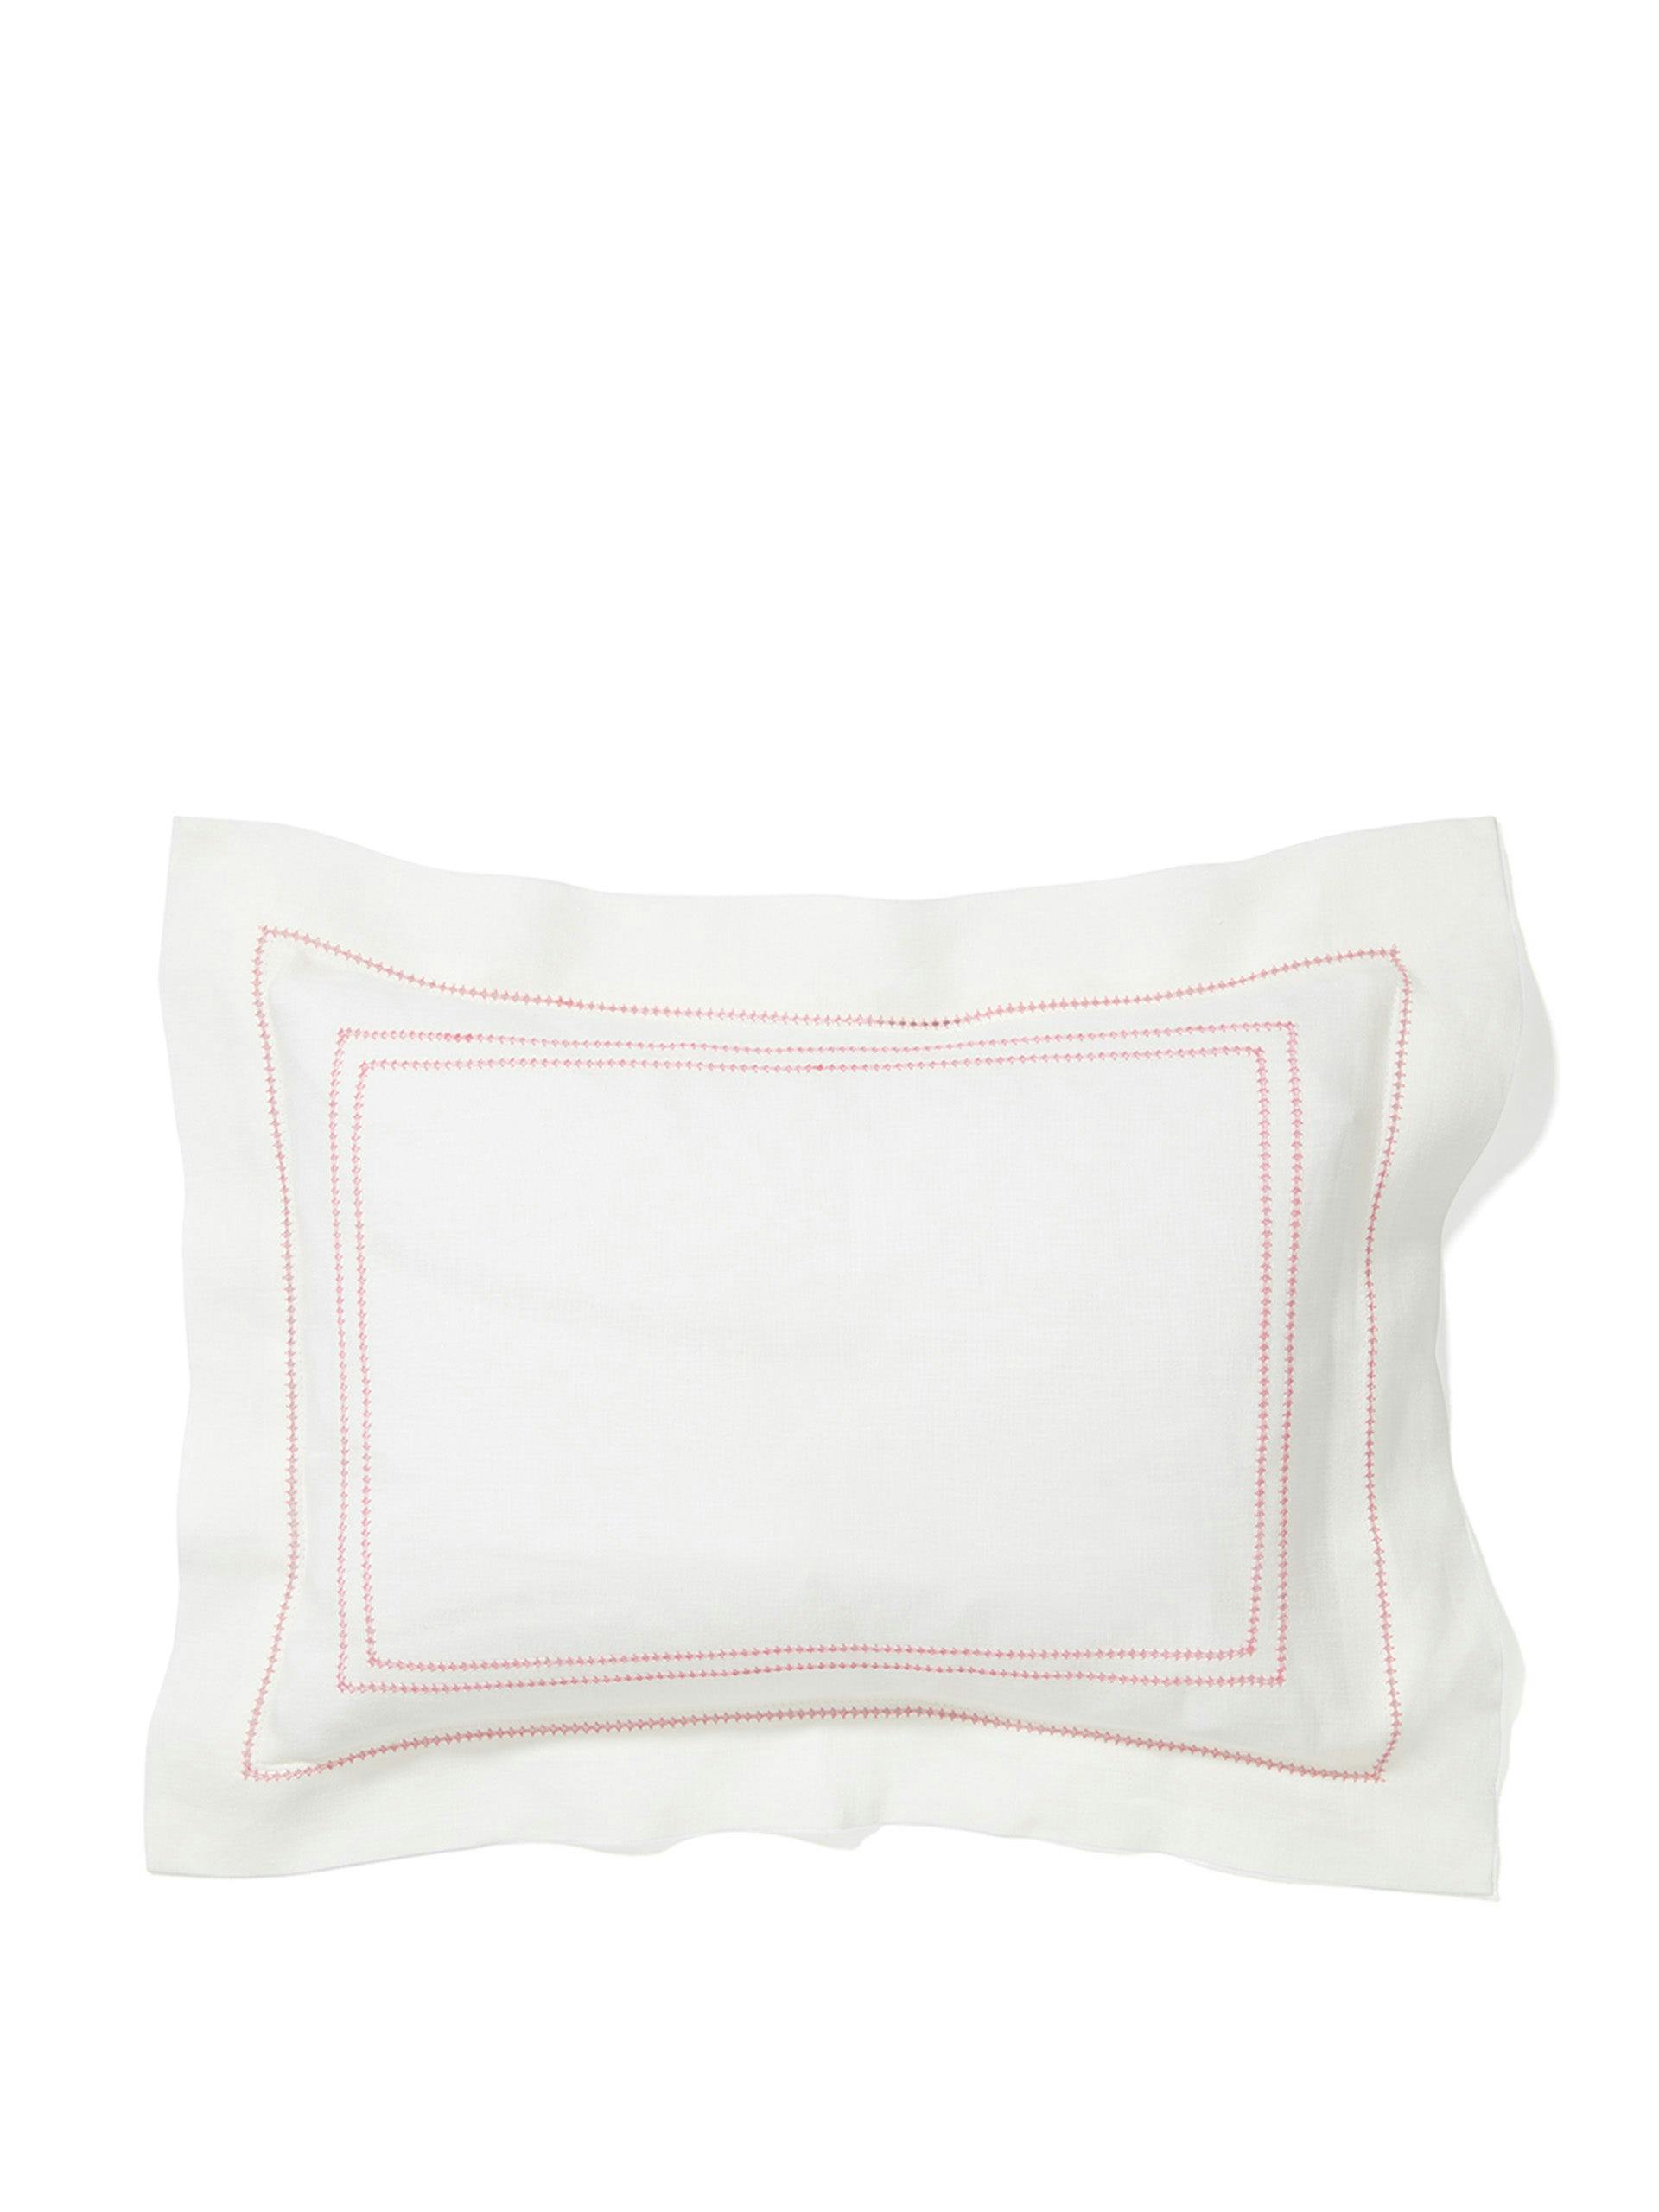 Small pillow with pink hemstitching